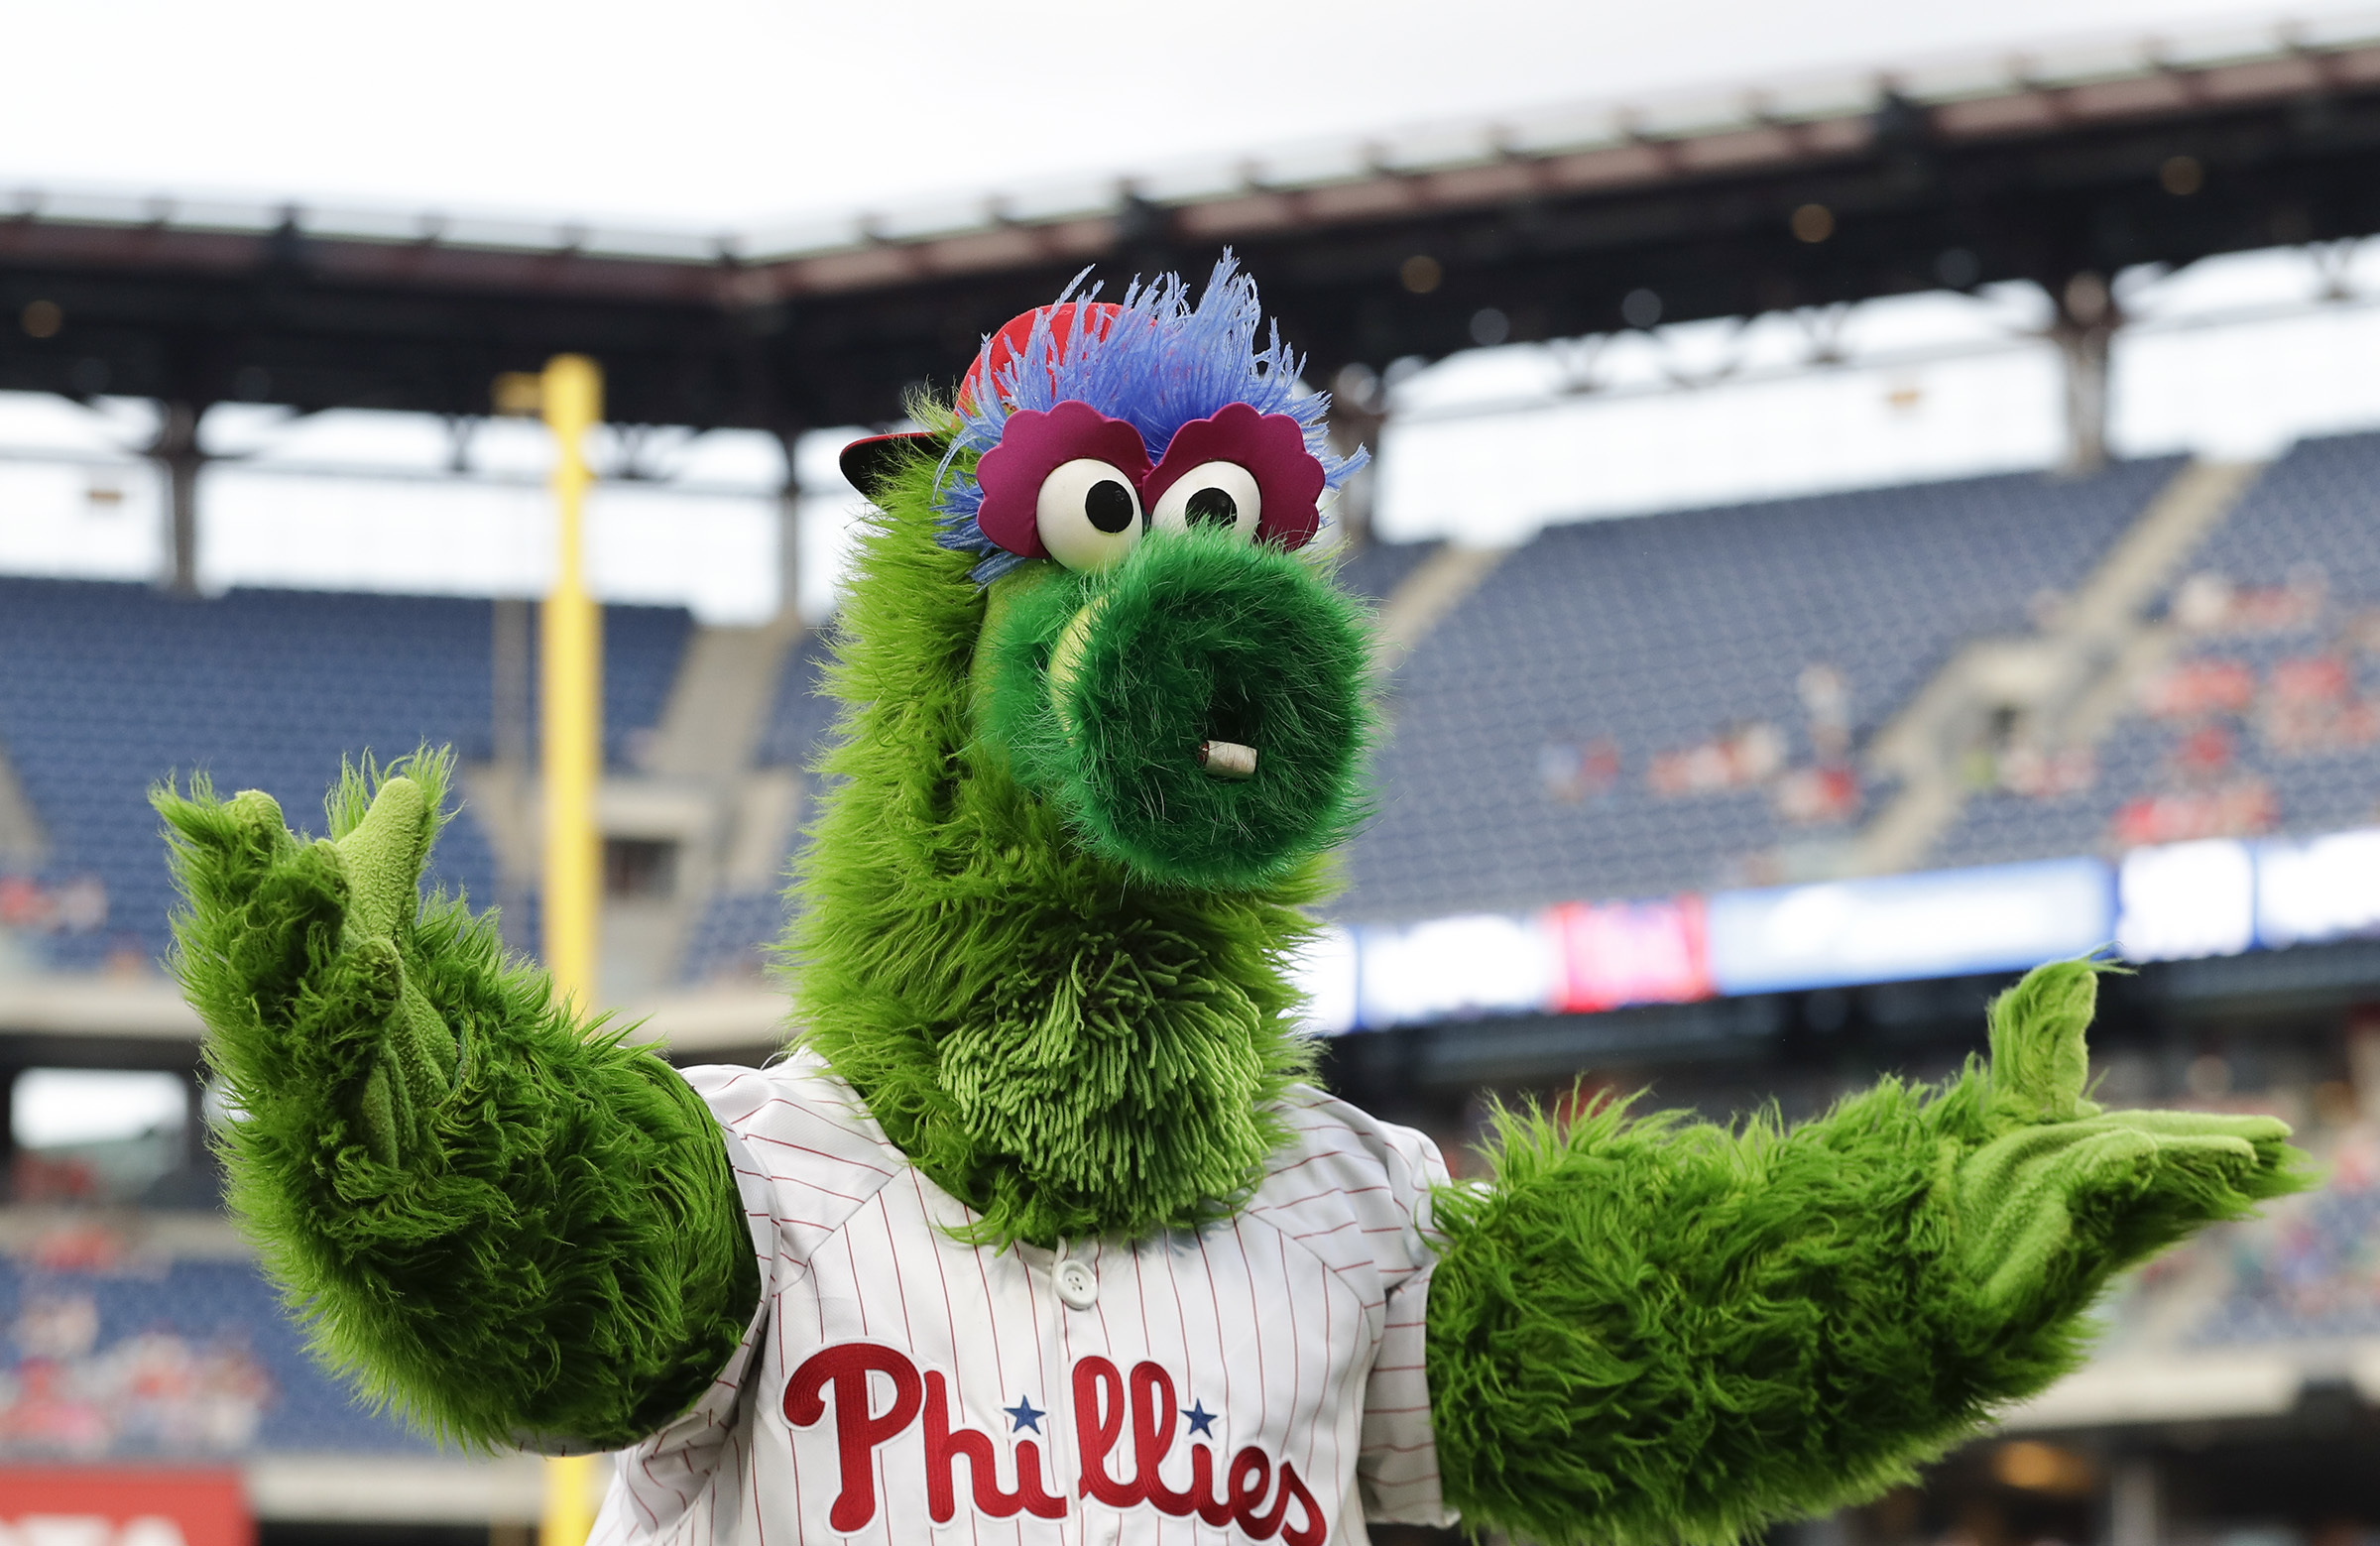 The Phillie Phanatic is getting a new look